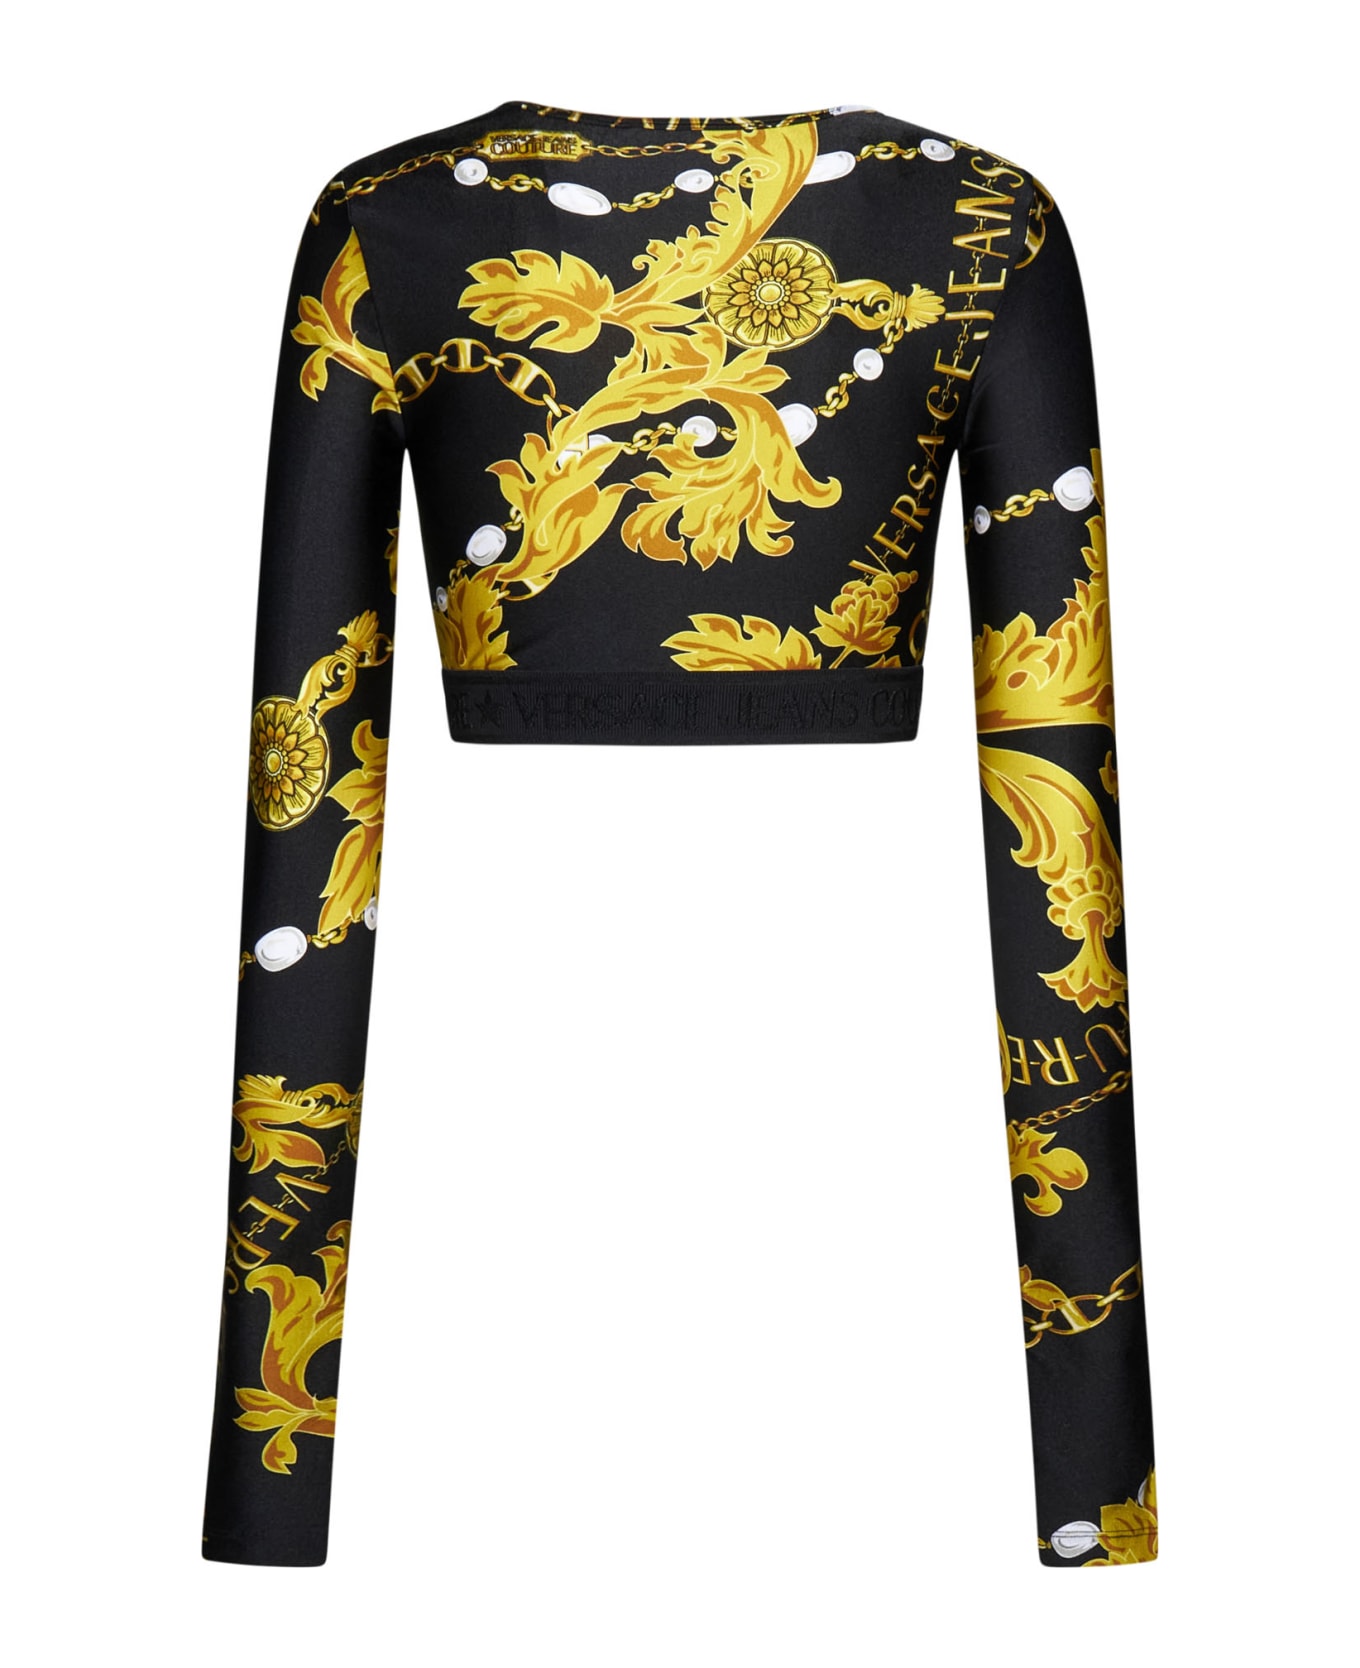 Versace Jeans Couture Logo Couture-print Crop Top - Black gold